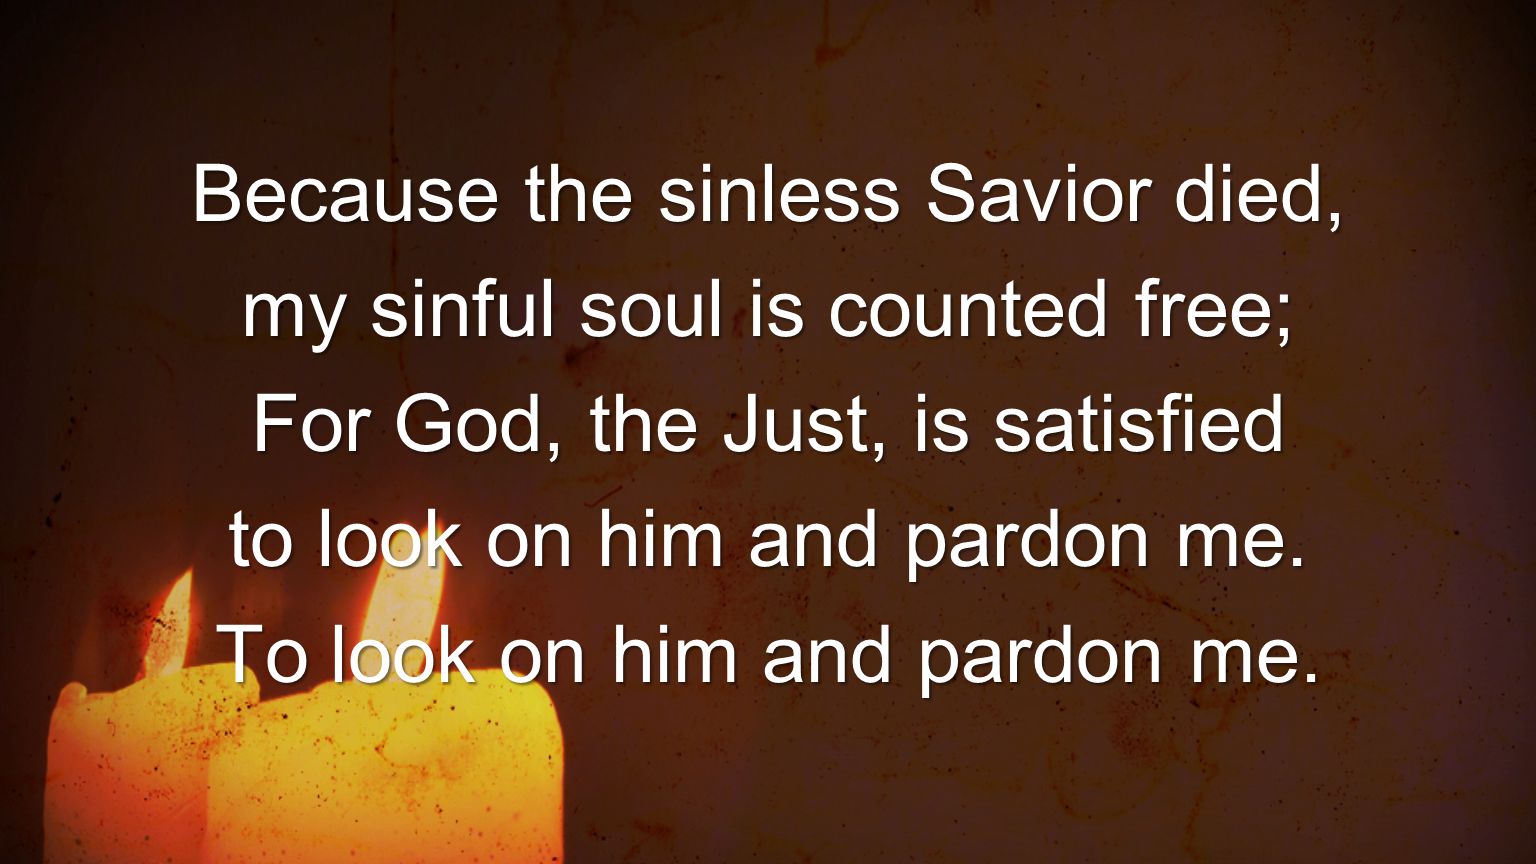 Because the sinless Savior died, my sinful soul is counted free;